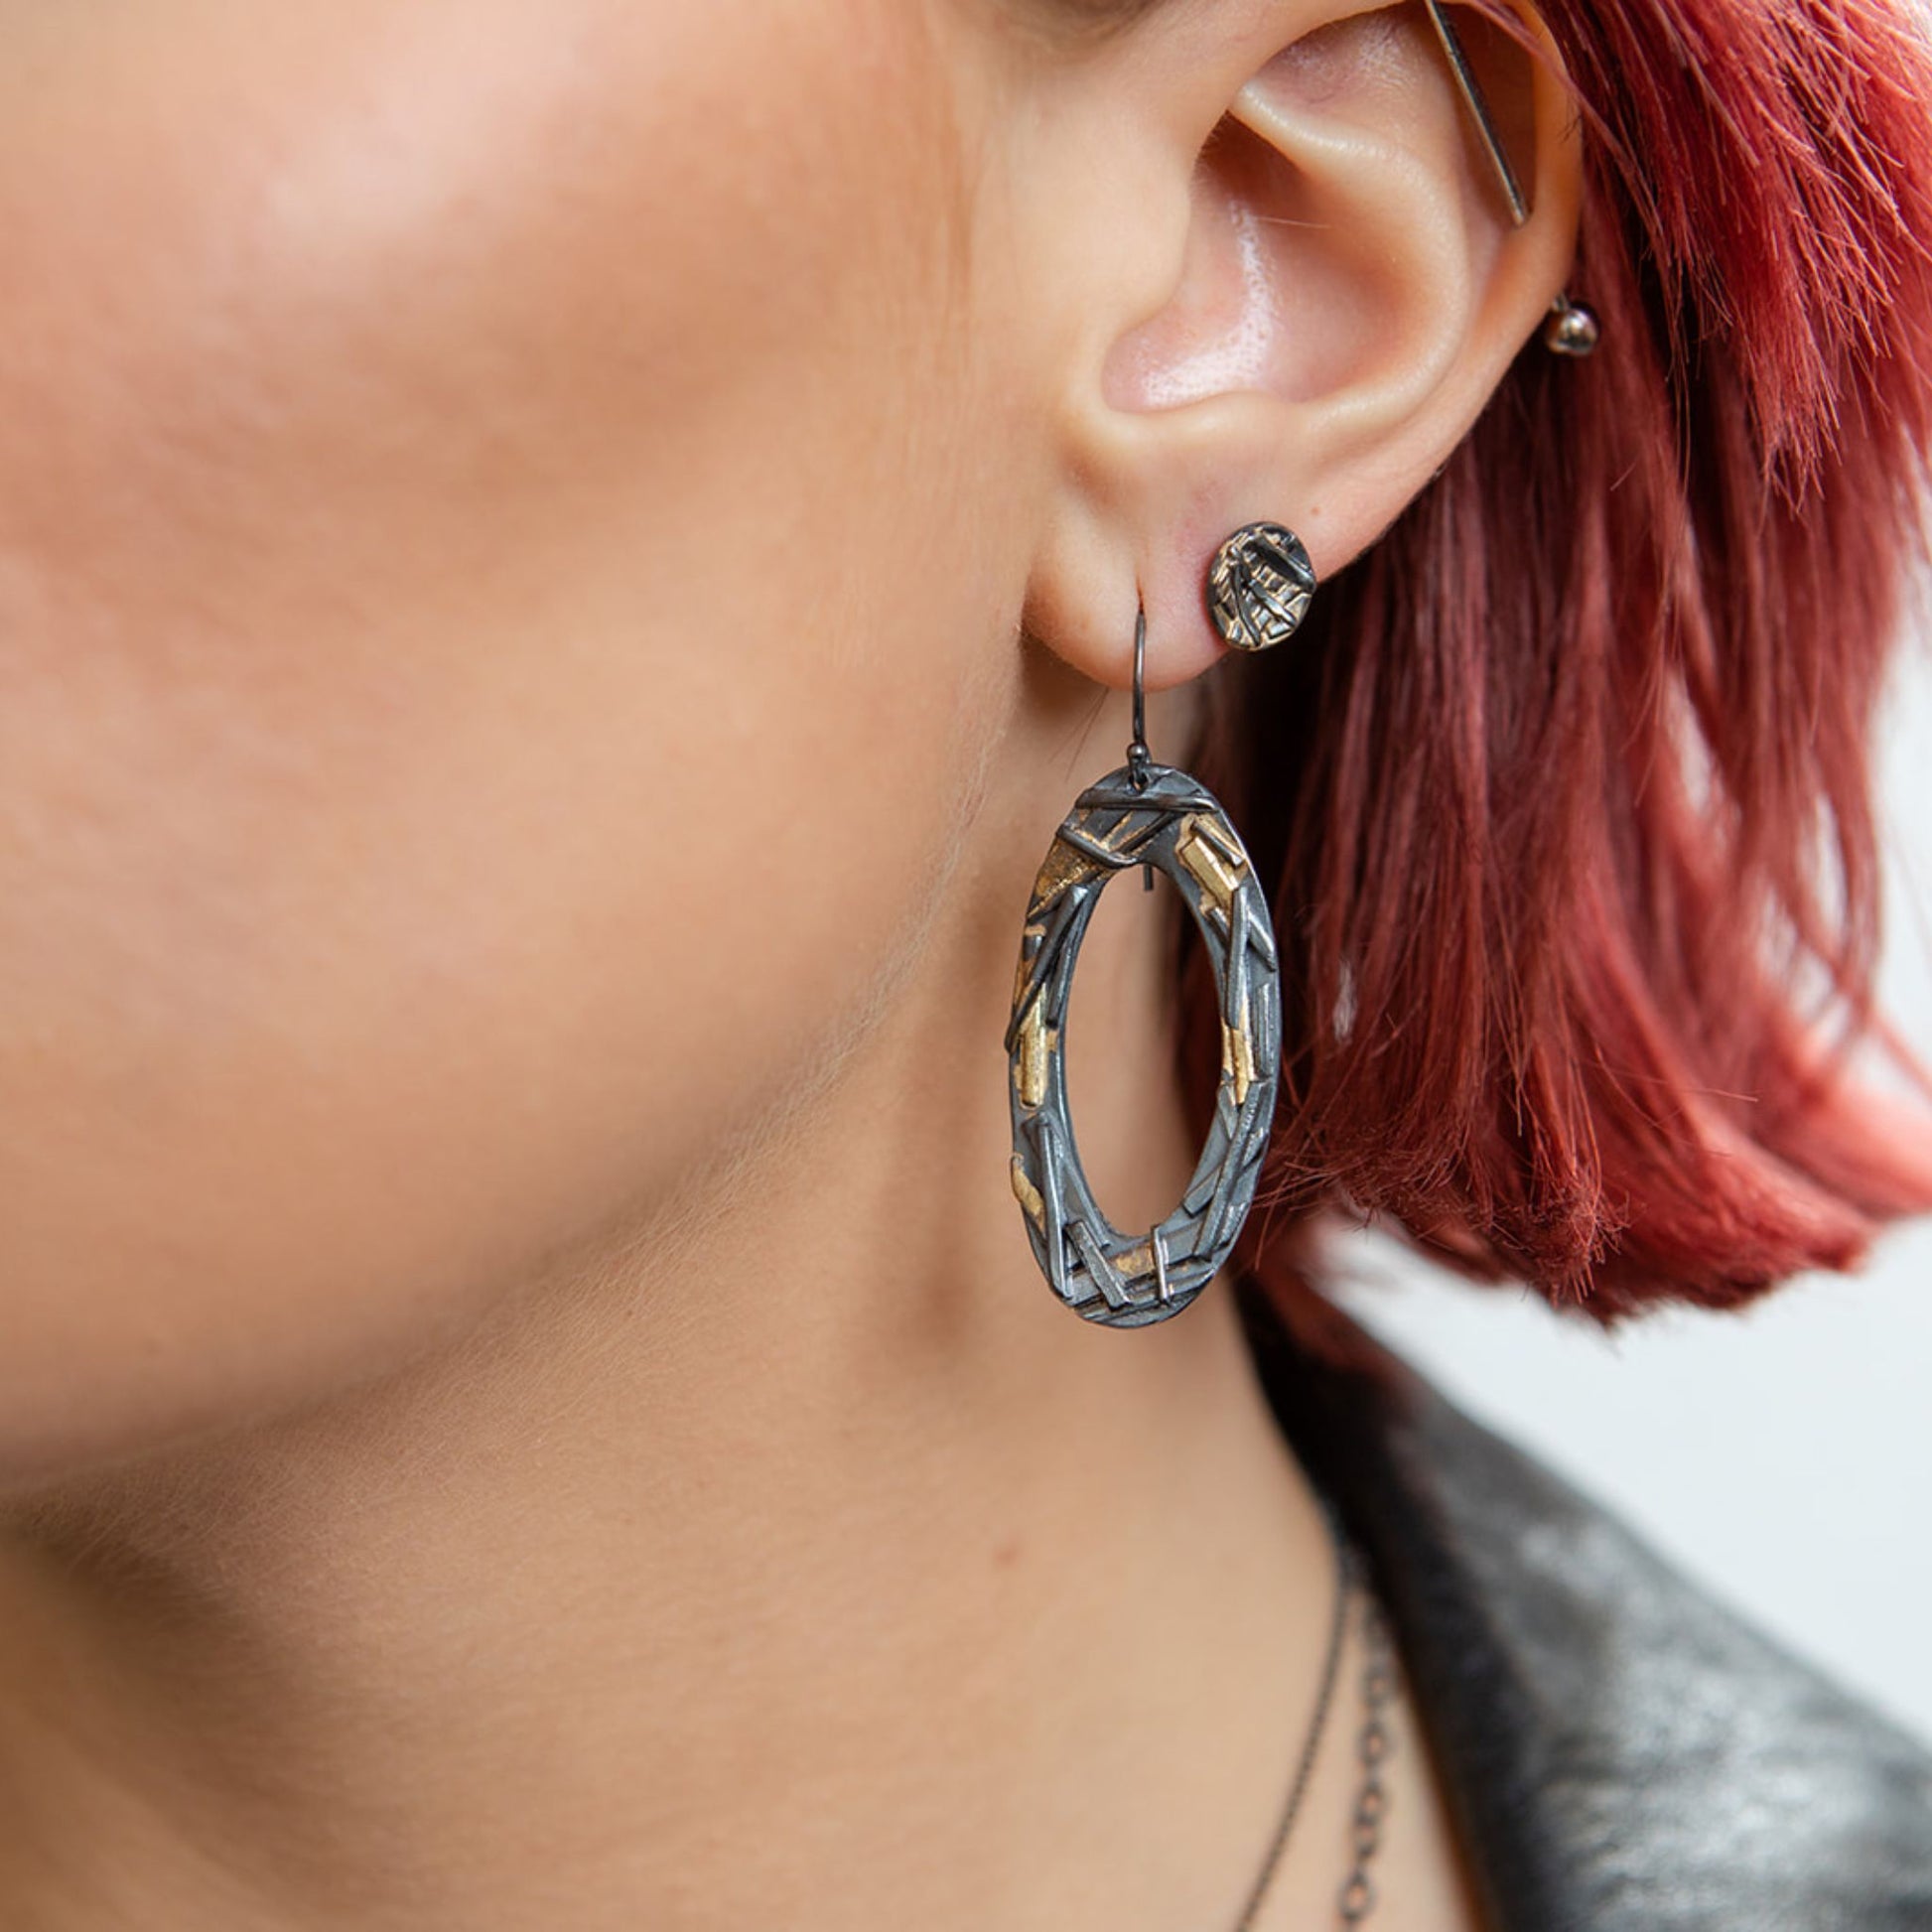 Oval mixed metal earrings close up on model